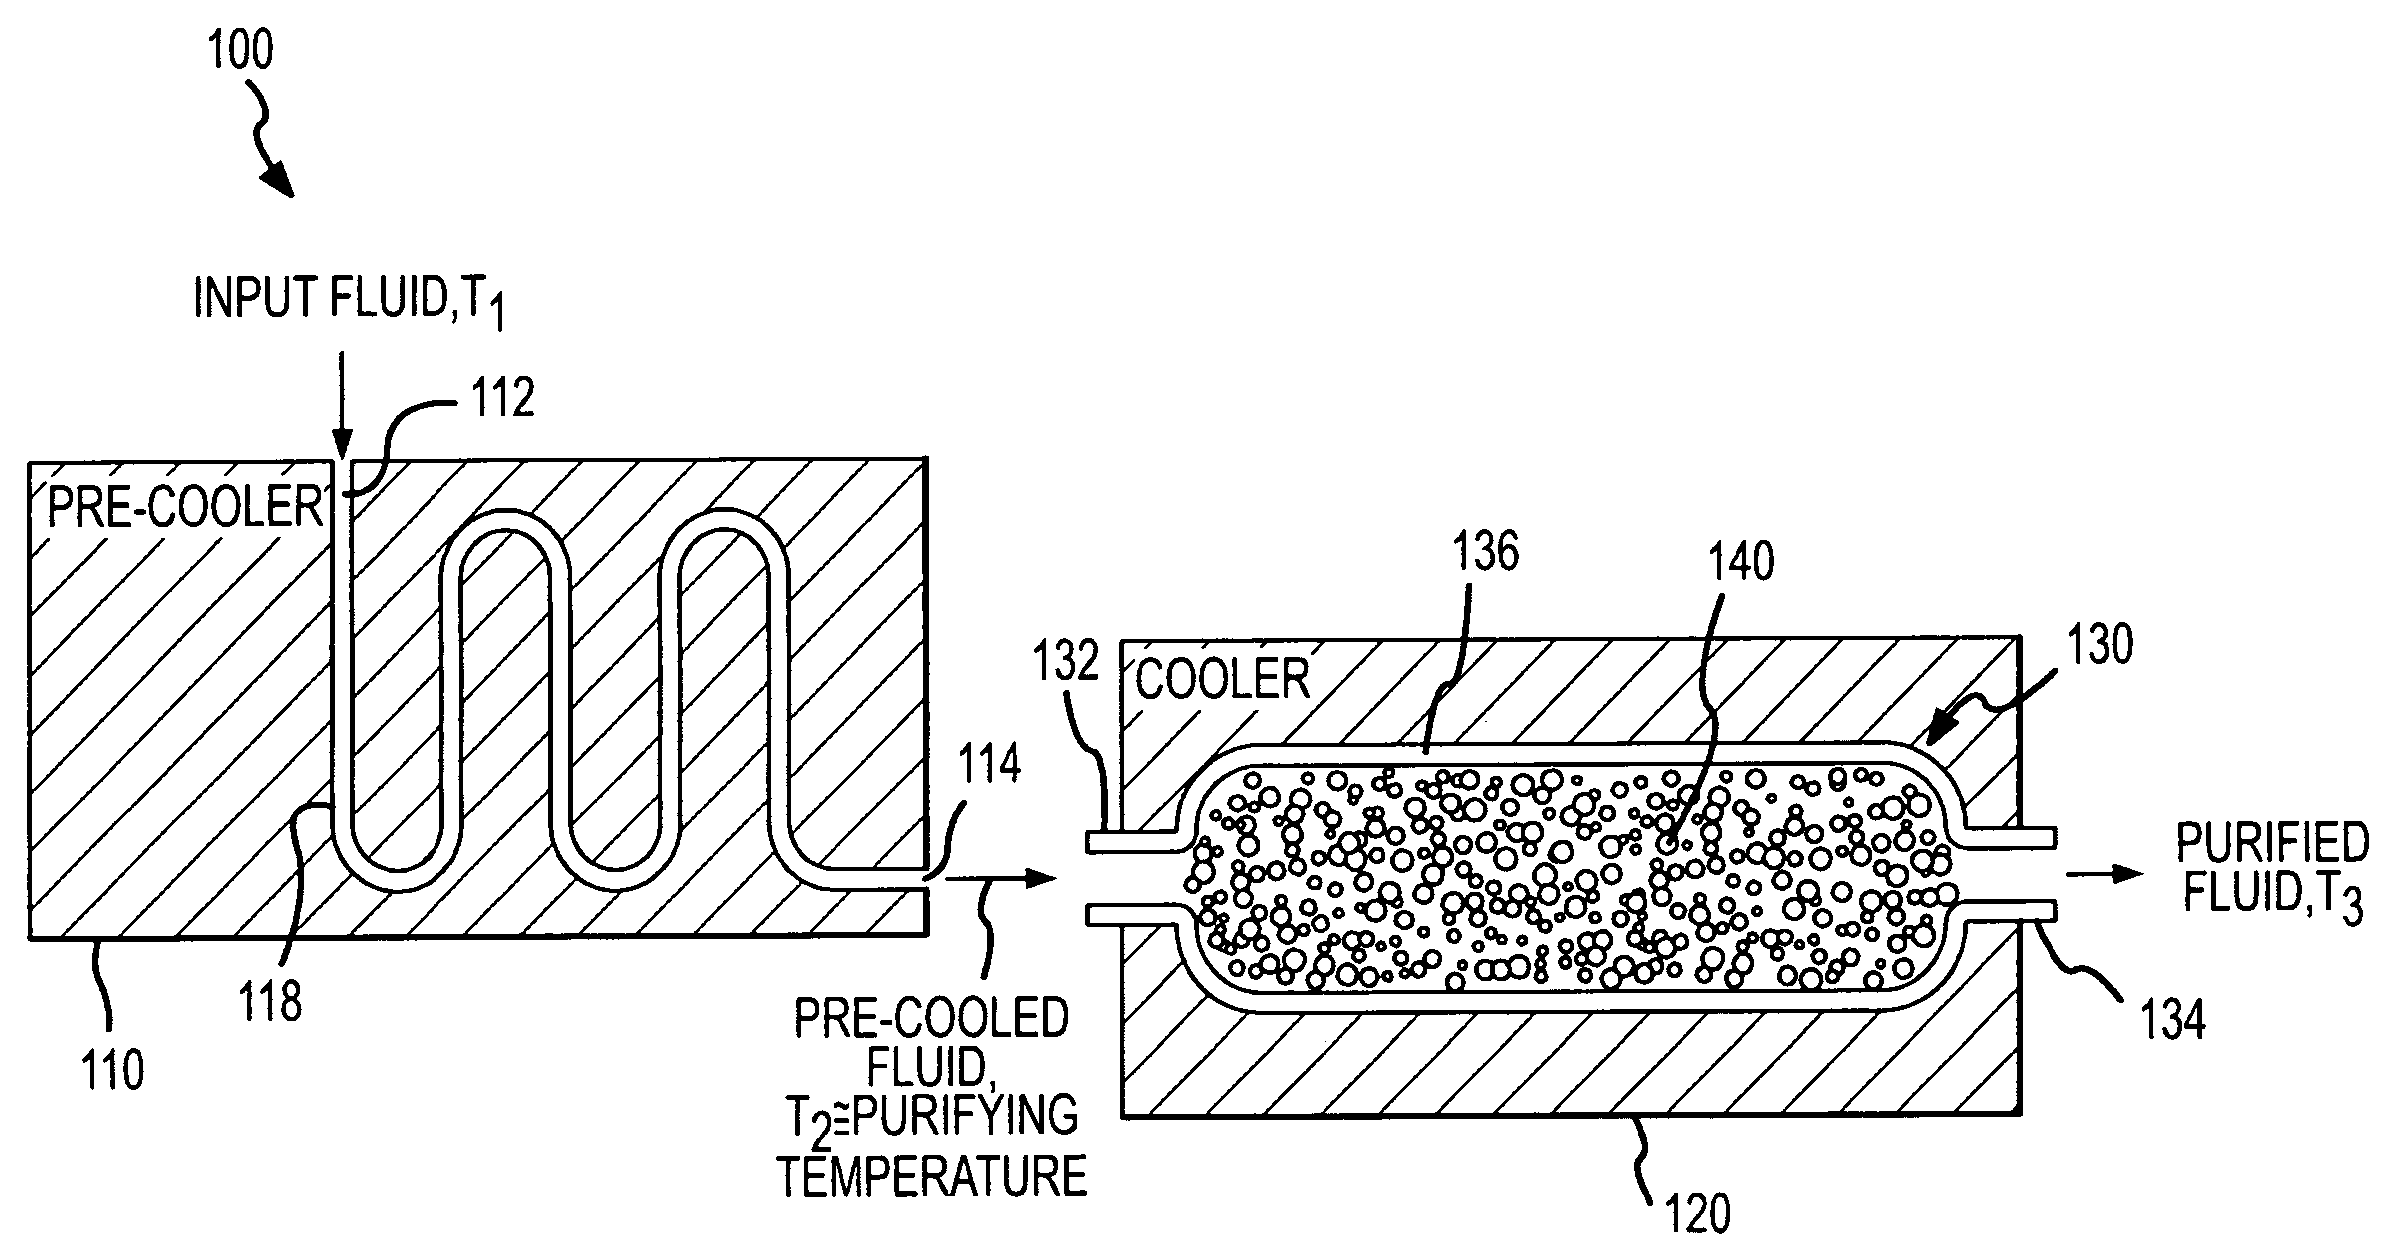 Fluid purification system with low temperature purifier